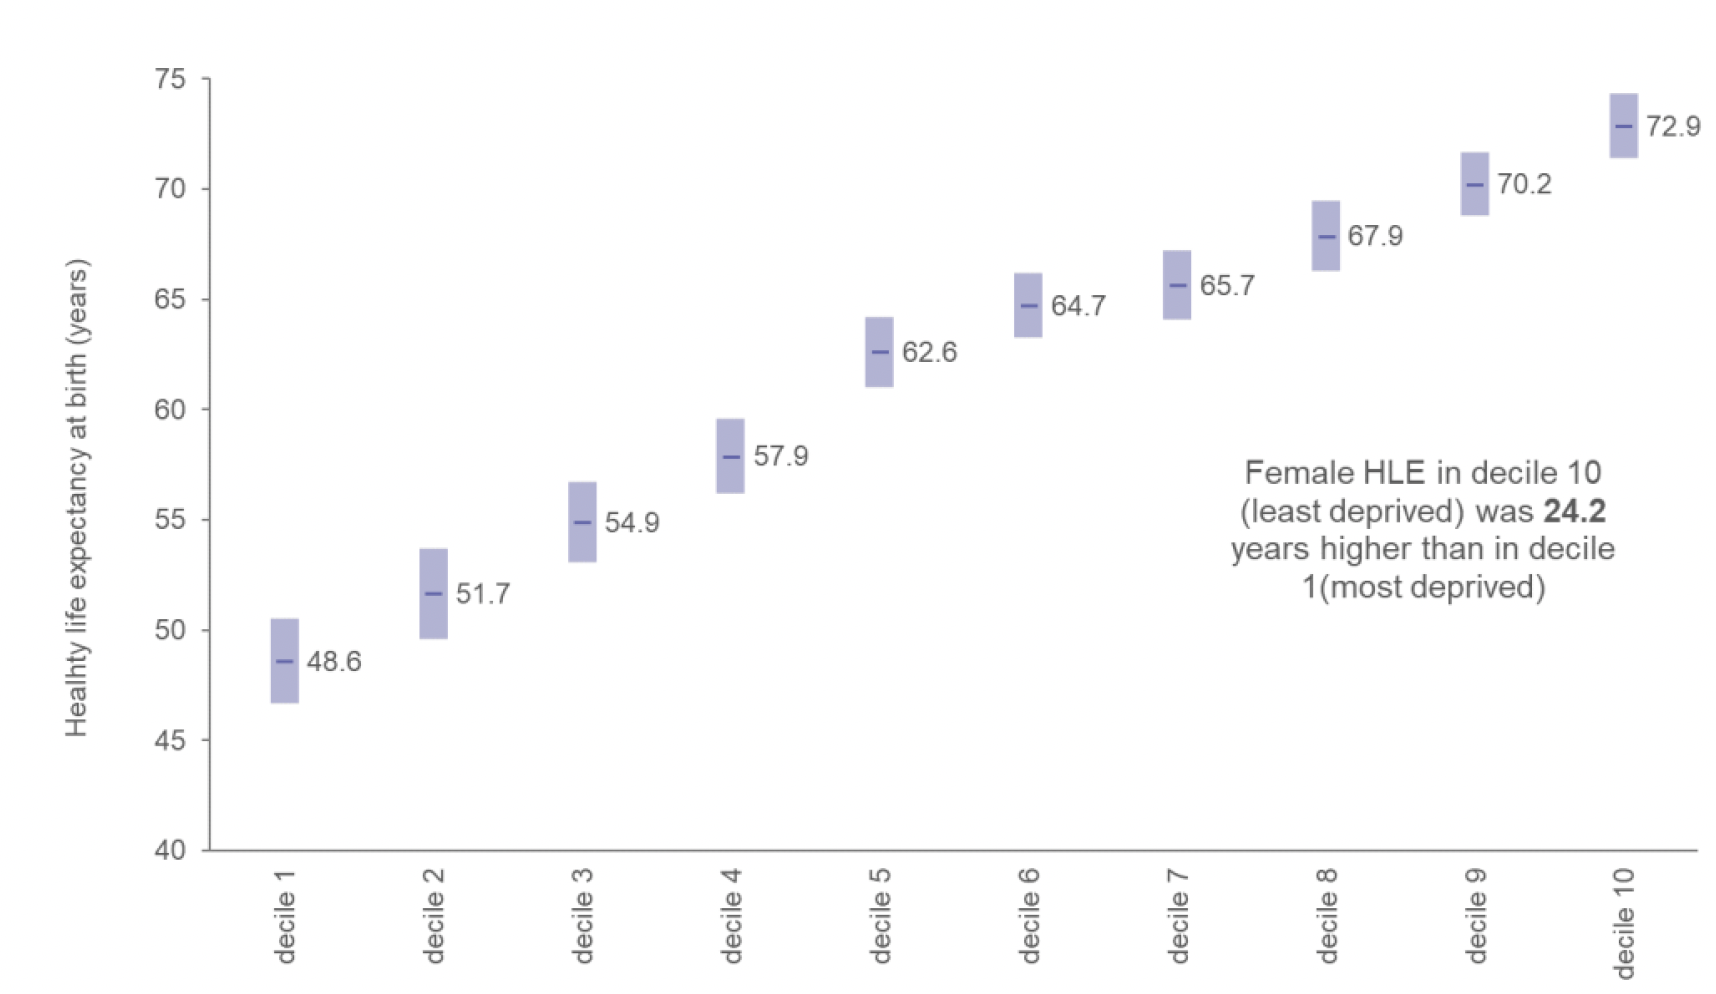 Line chart showing that female healthy life expectancy at birth was 24.2 years higher in SIMD decile 10 (least deprived) than in decile 1 (most deprived) in 2018-2020.